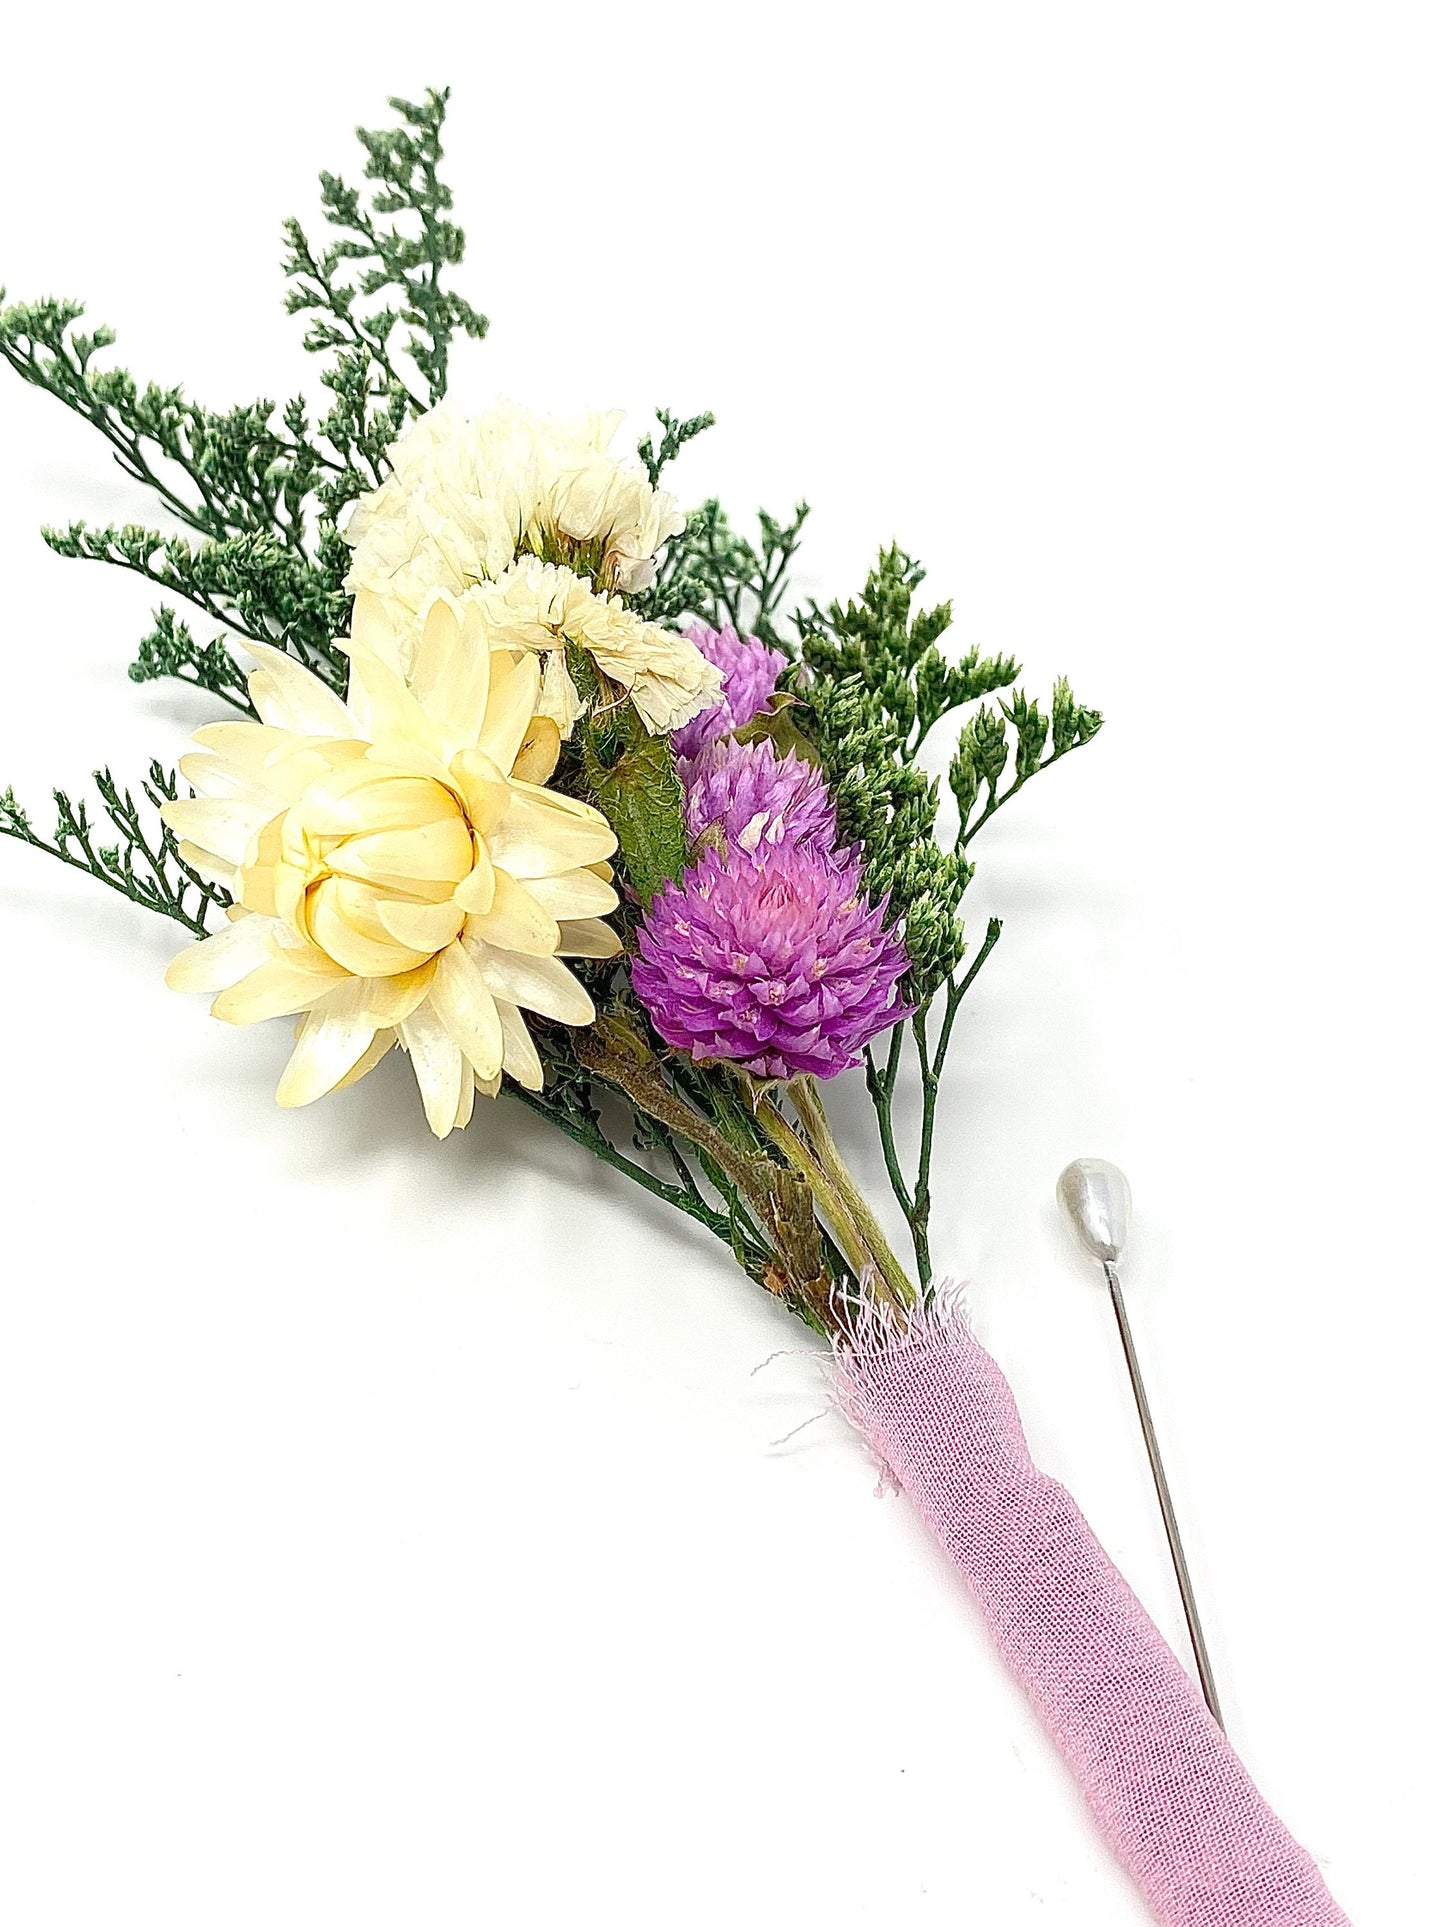 Boutonniere, Wedding Accessories, Dried Flowers, Preserved Floral, Bridal, Decor, Pink and White, Strawflowers, Green